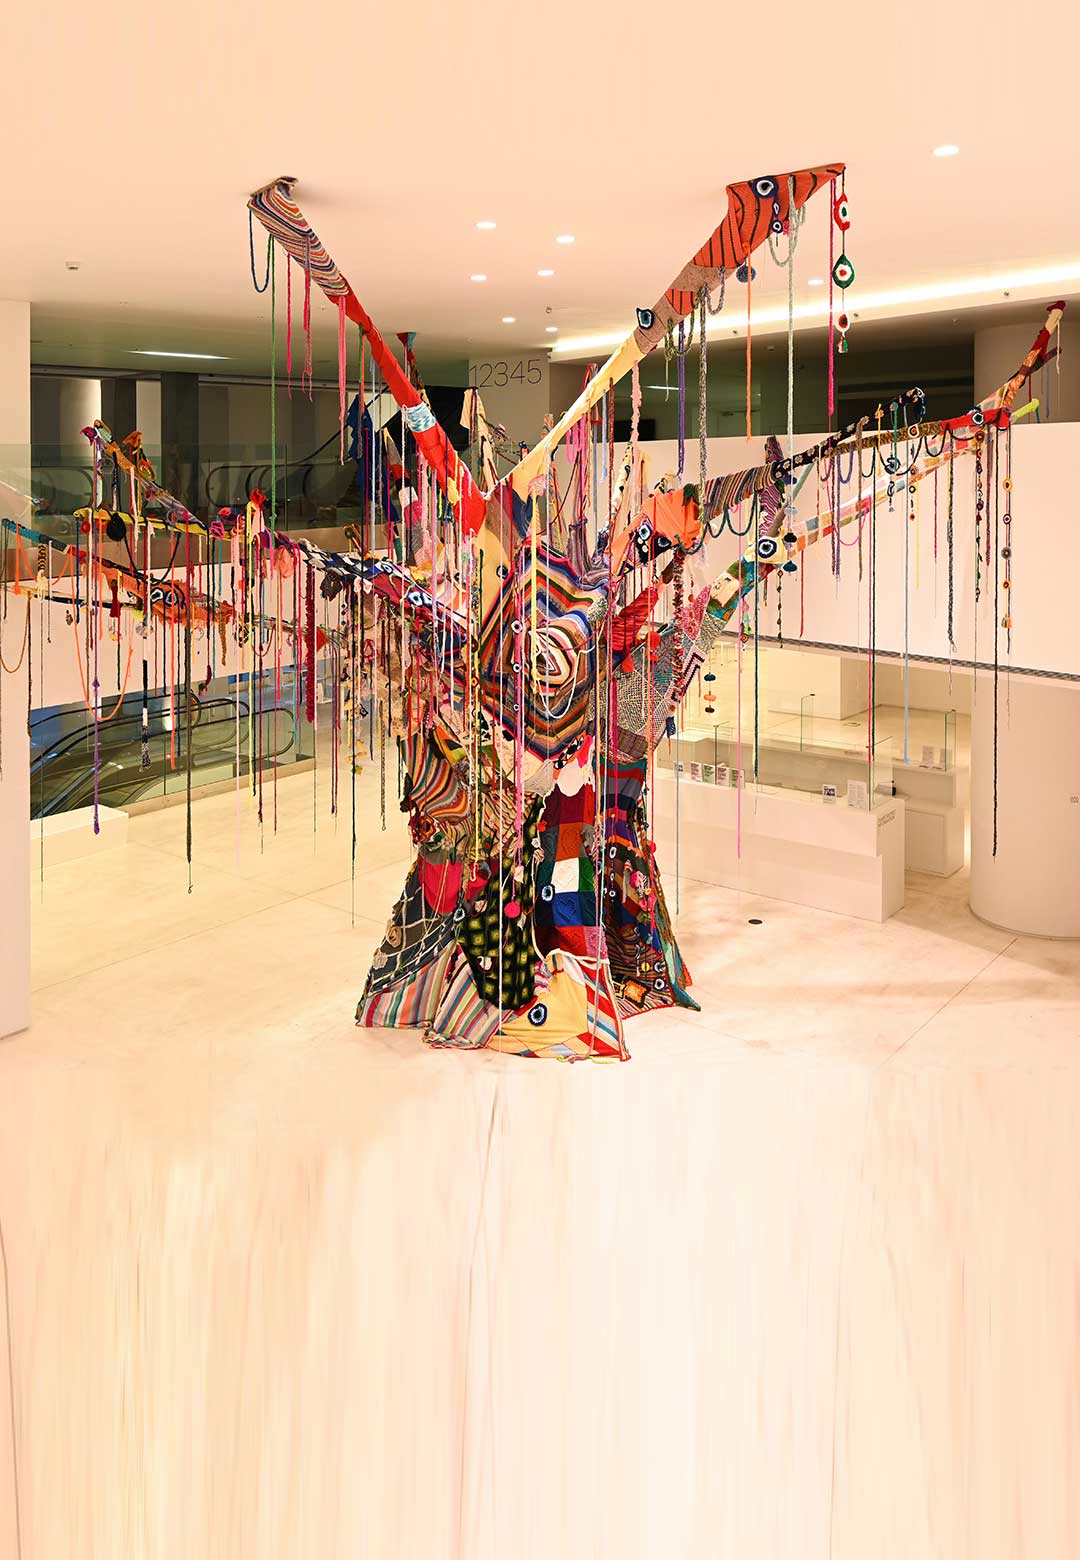 Stephan Goldrajch’s Arbre à palabres weaves in human relationships